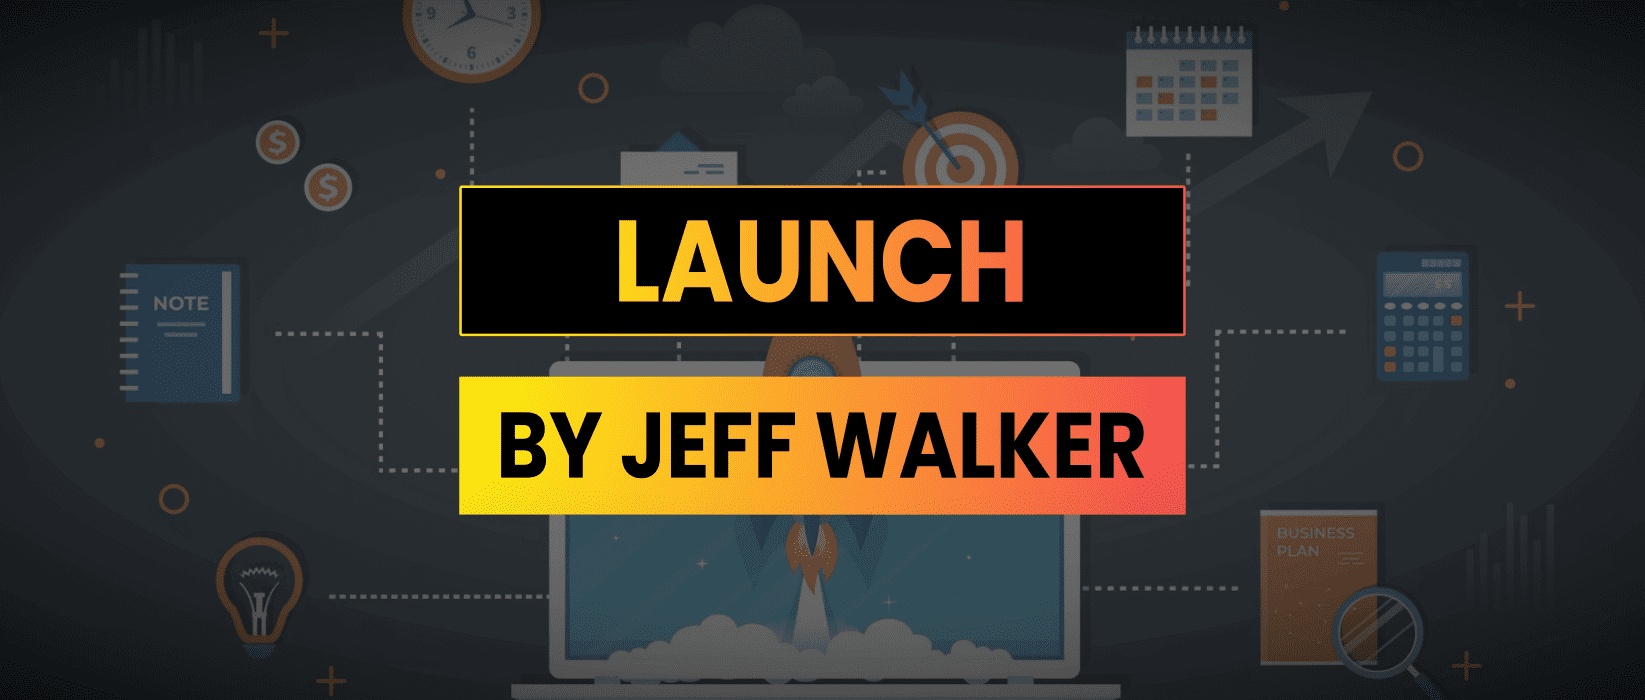 LAUNCH by Jeff Walker Summary Notes